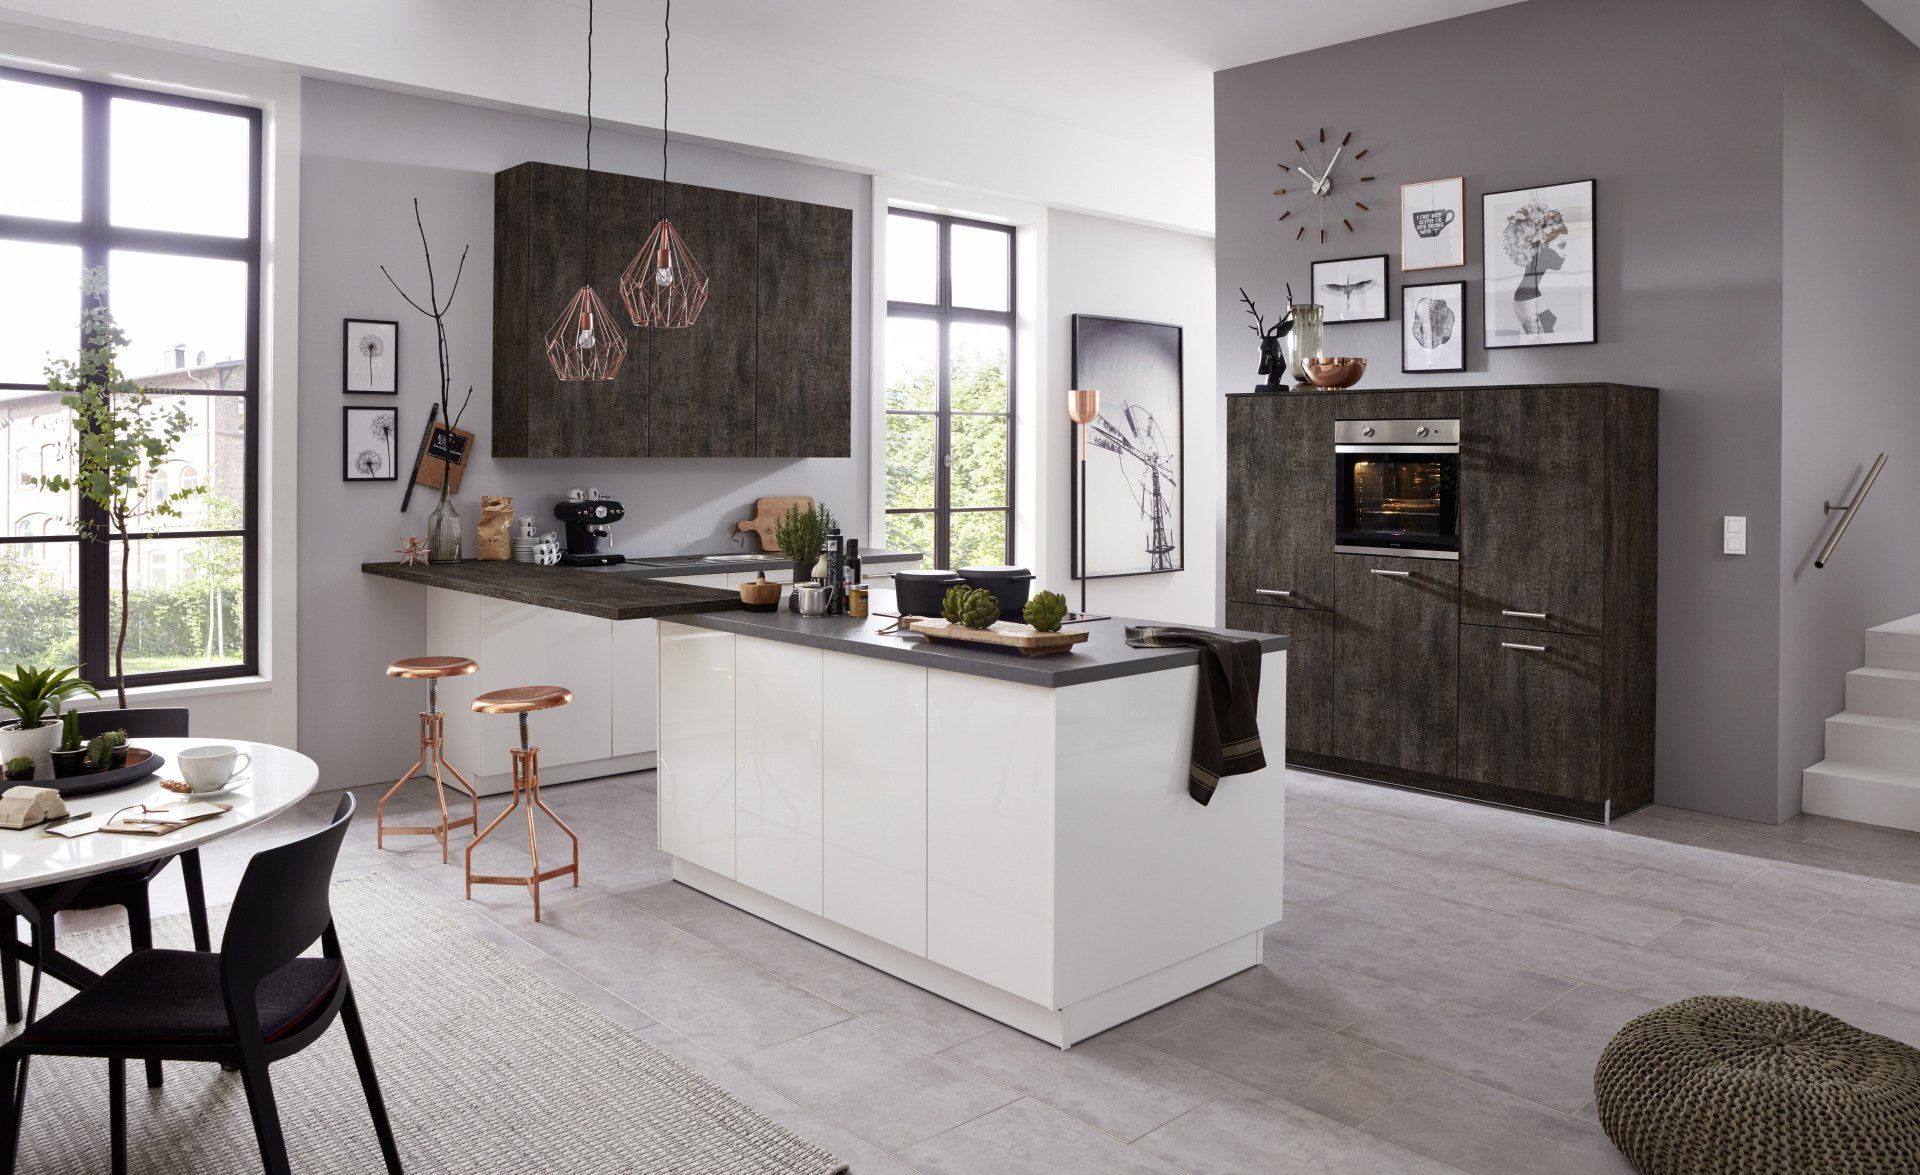 A kitchen extension is your chance to have your dream kitchen